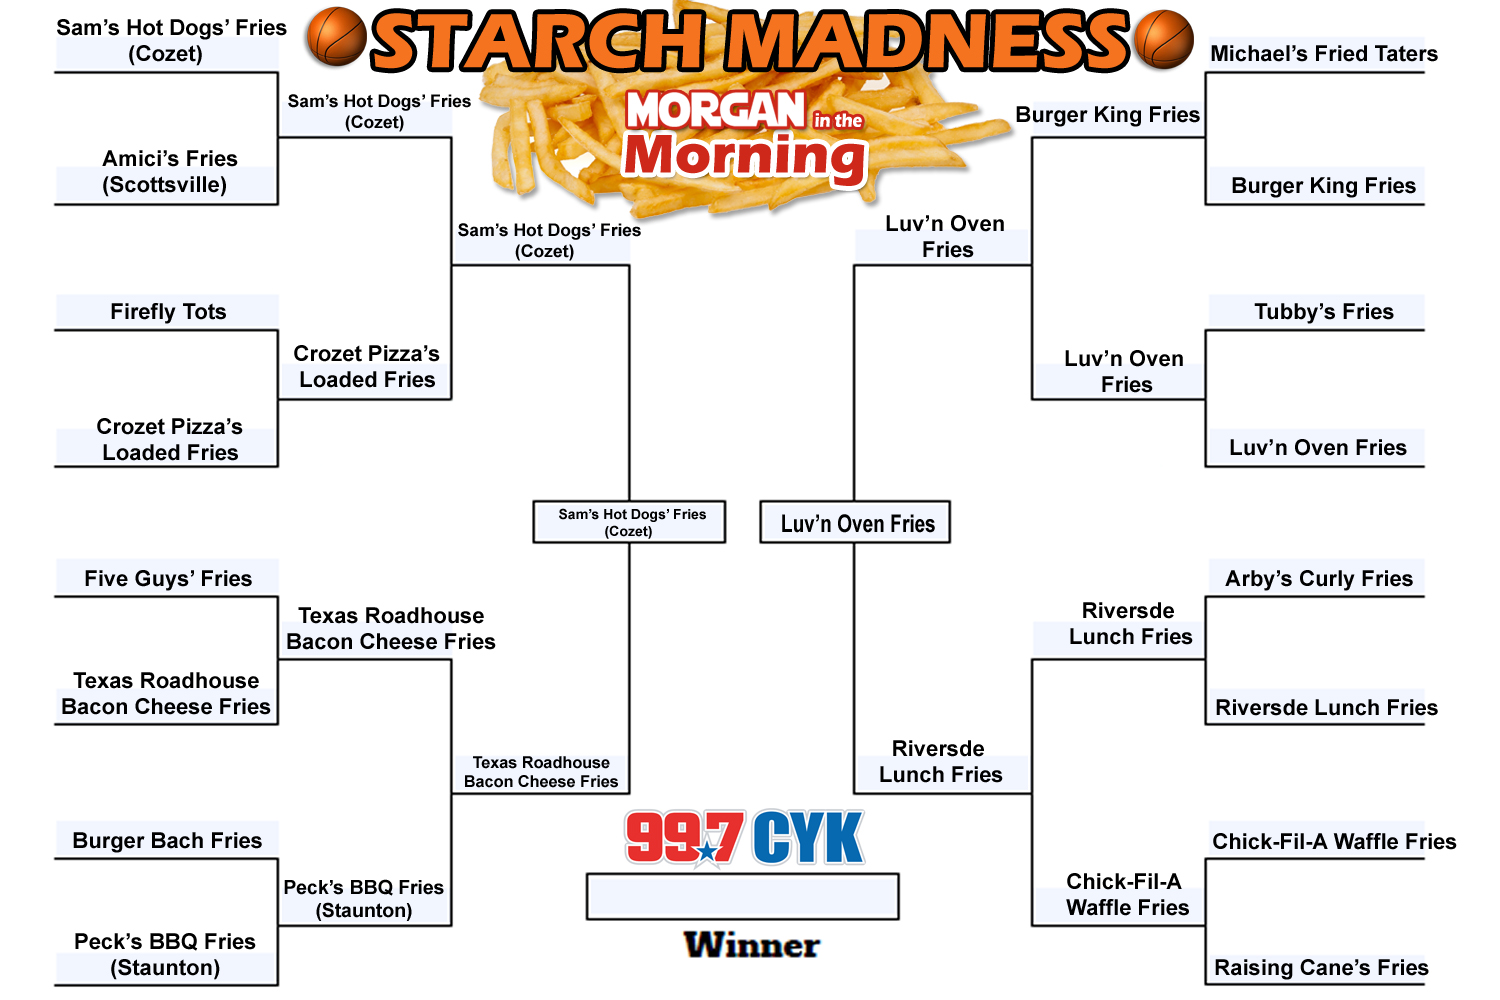 Starch Madness Champion-Chip (get it?) 2019